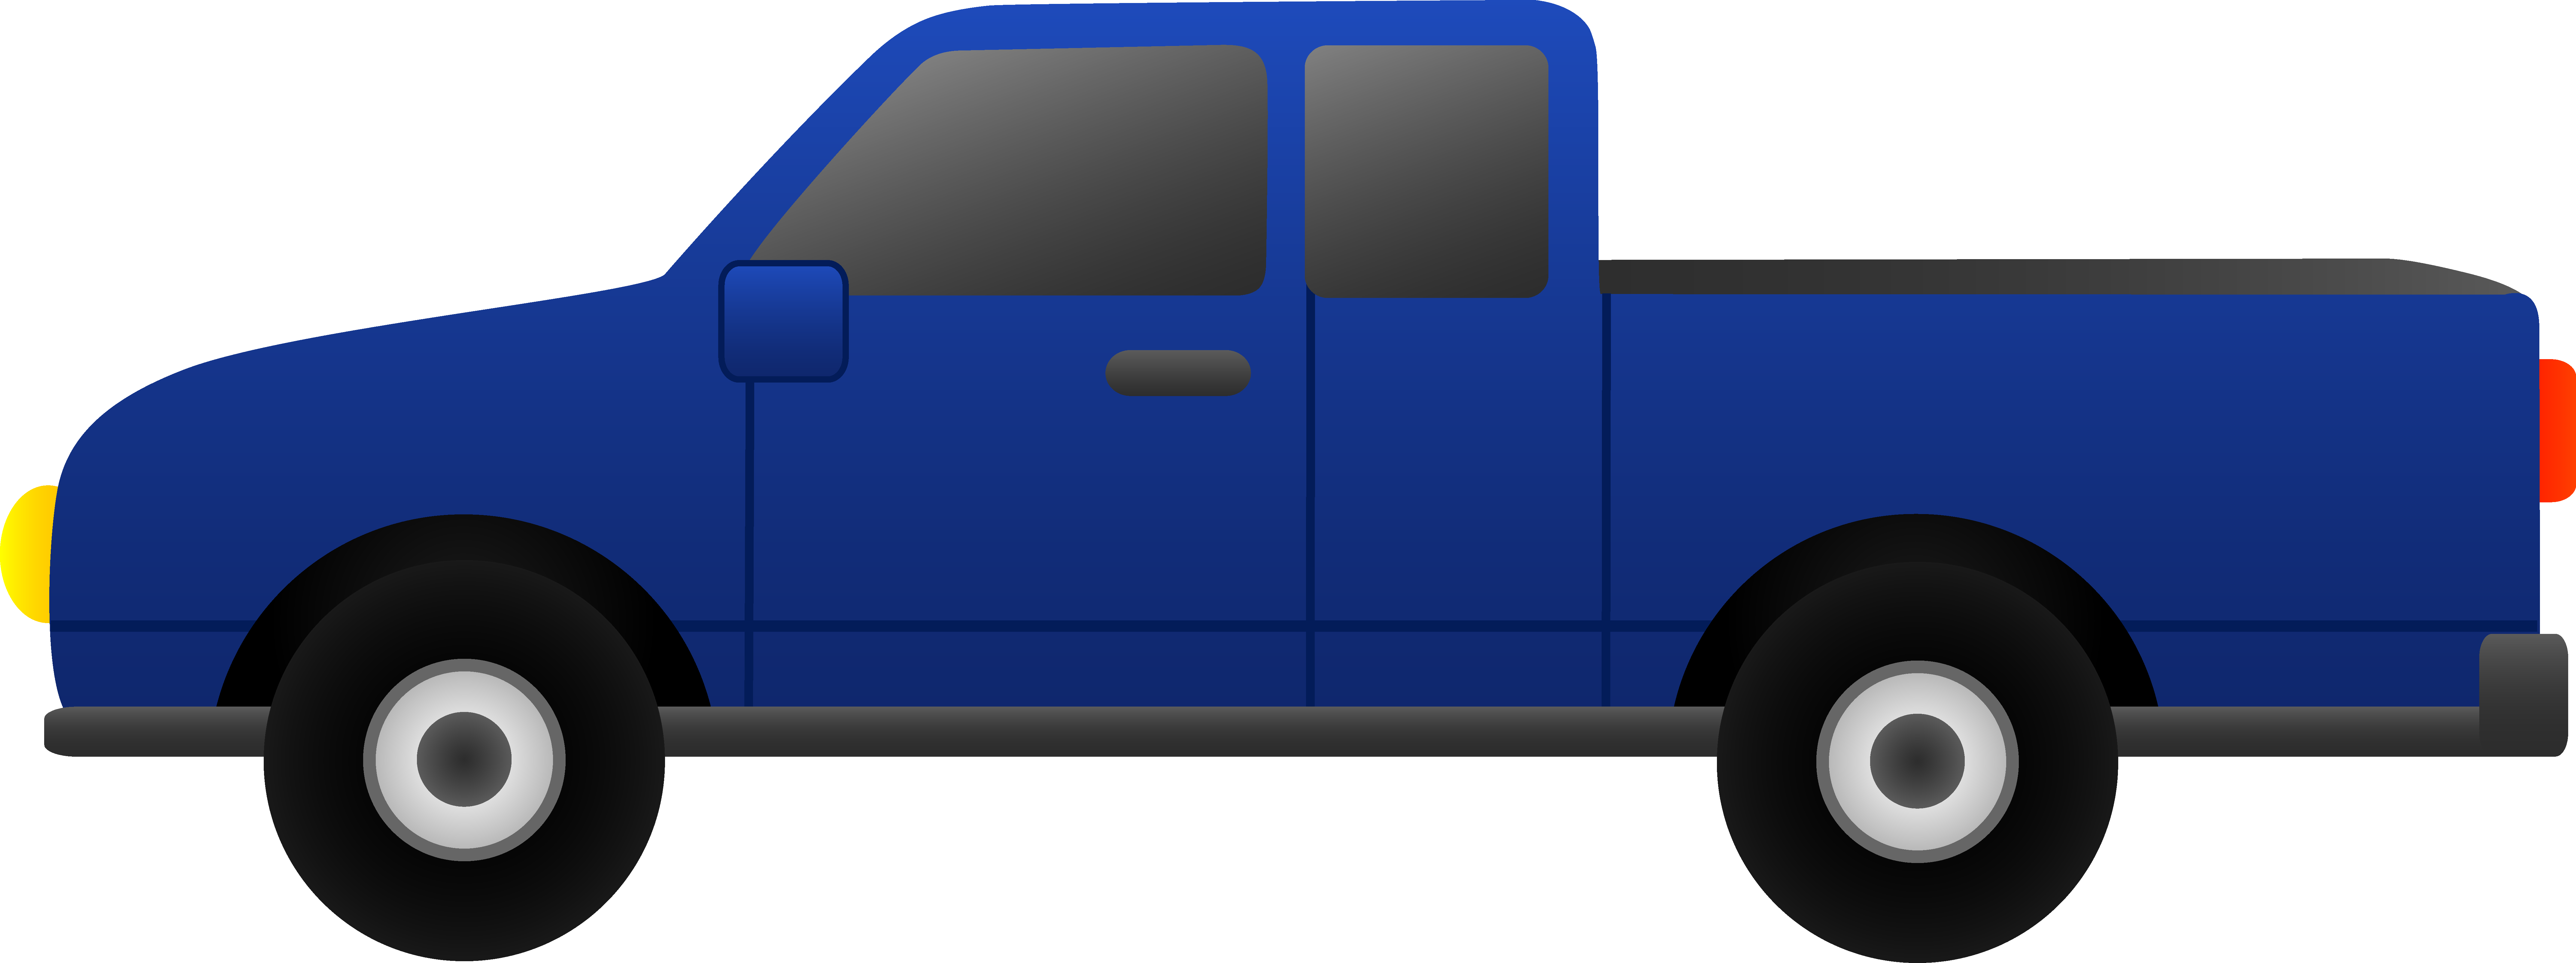 free black and white truck clipart - photo #11